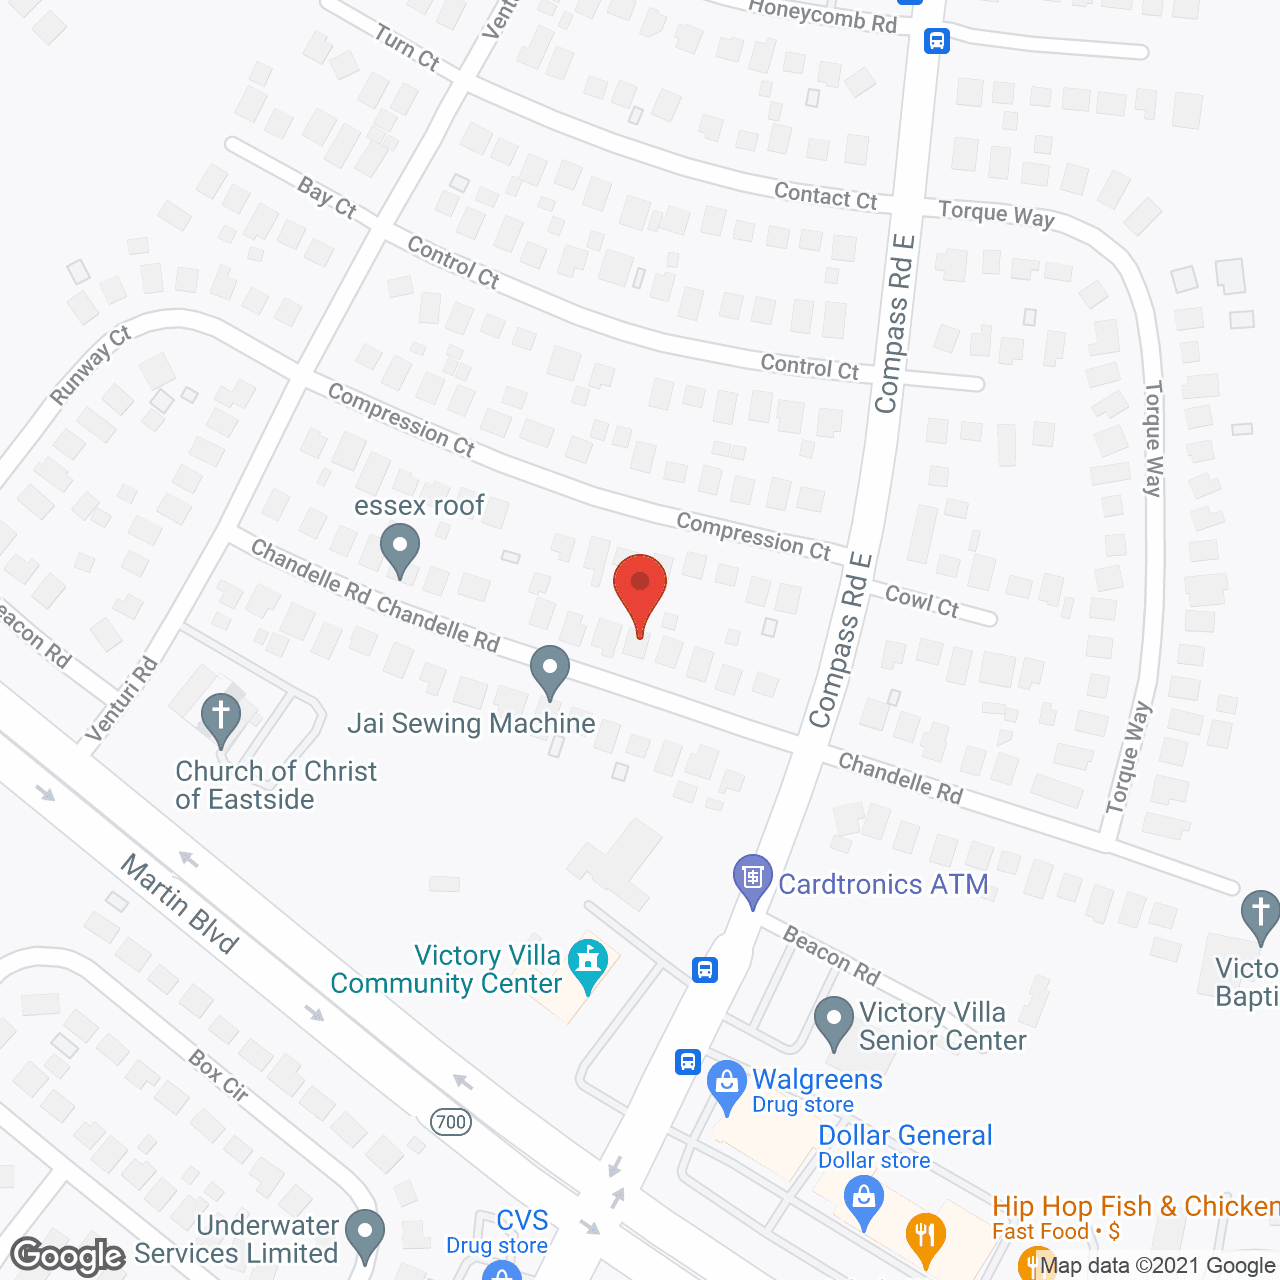 Heavenly Home in google map